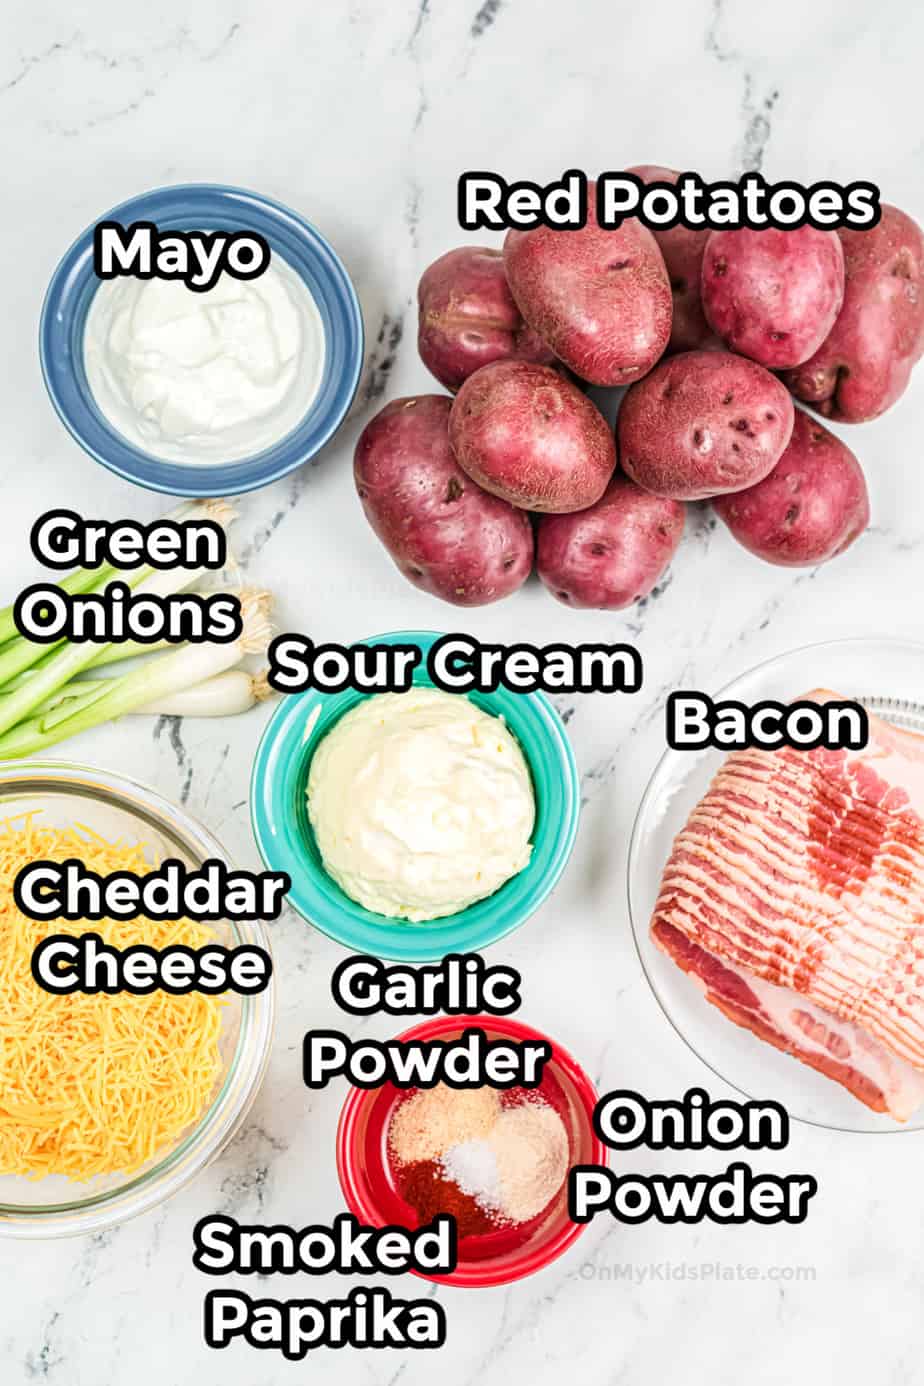 Ingredients for loaded potato salad in bowls.